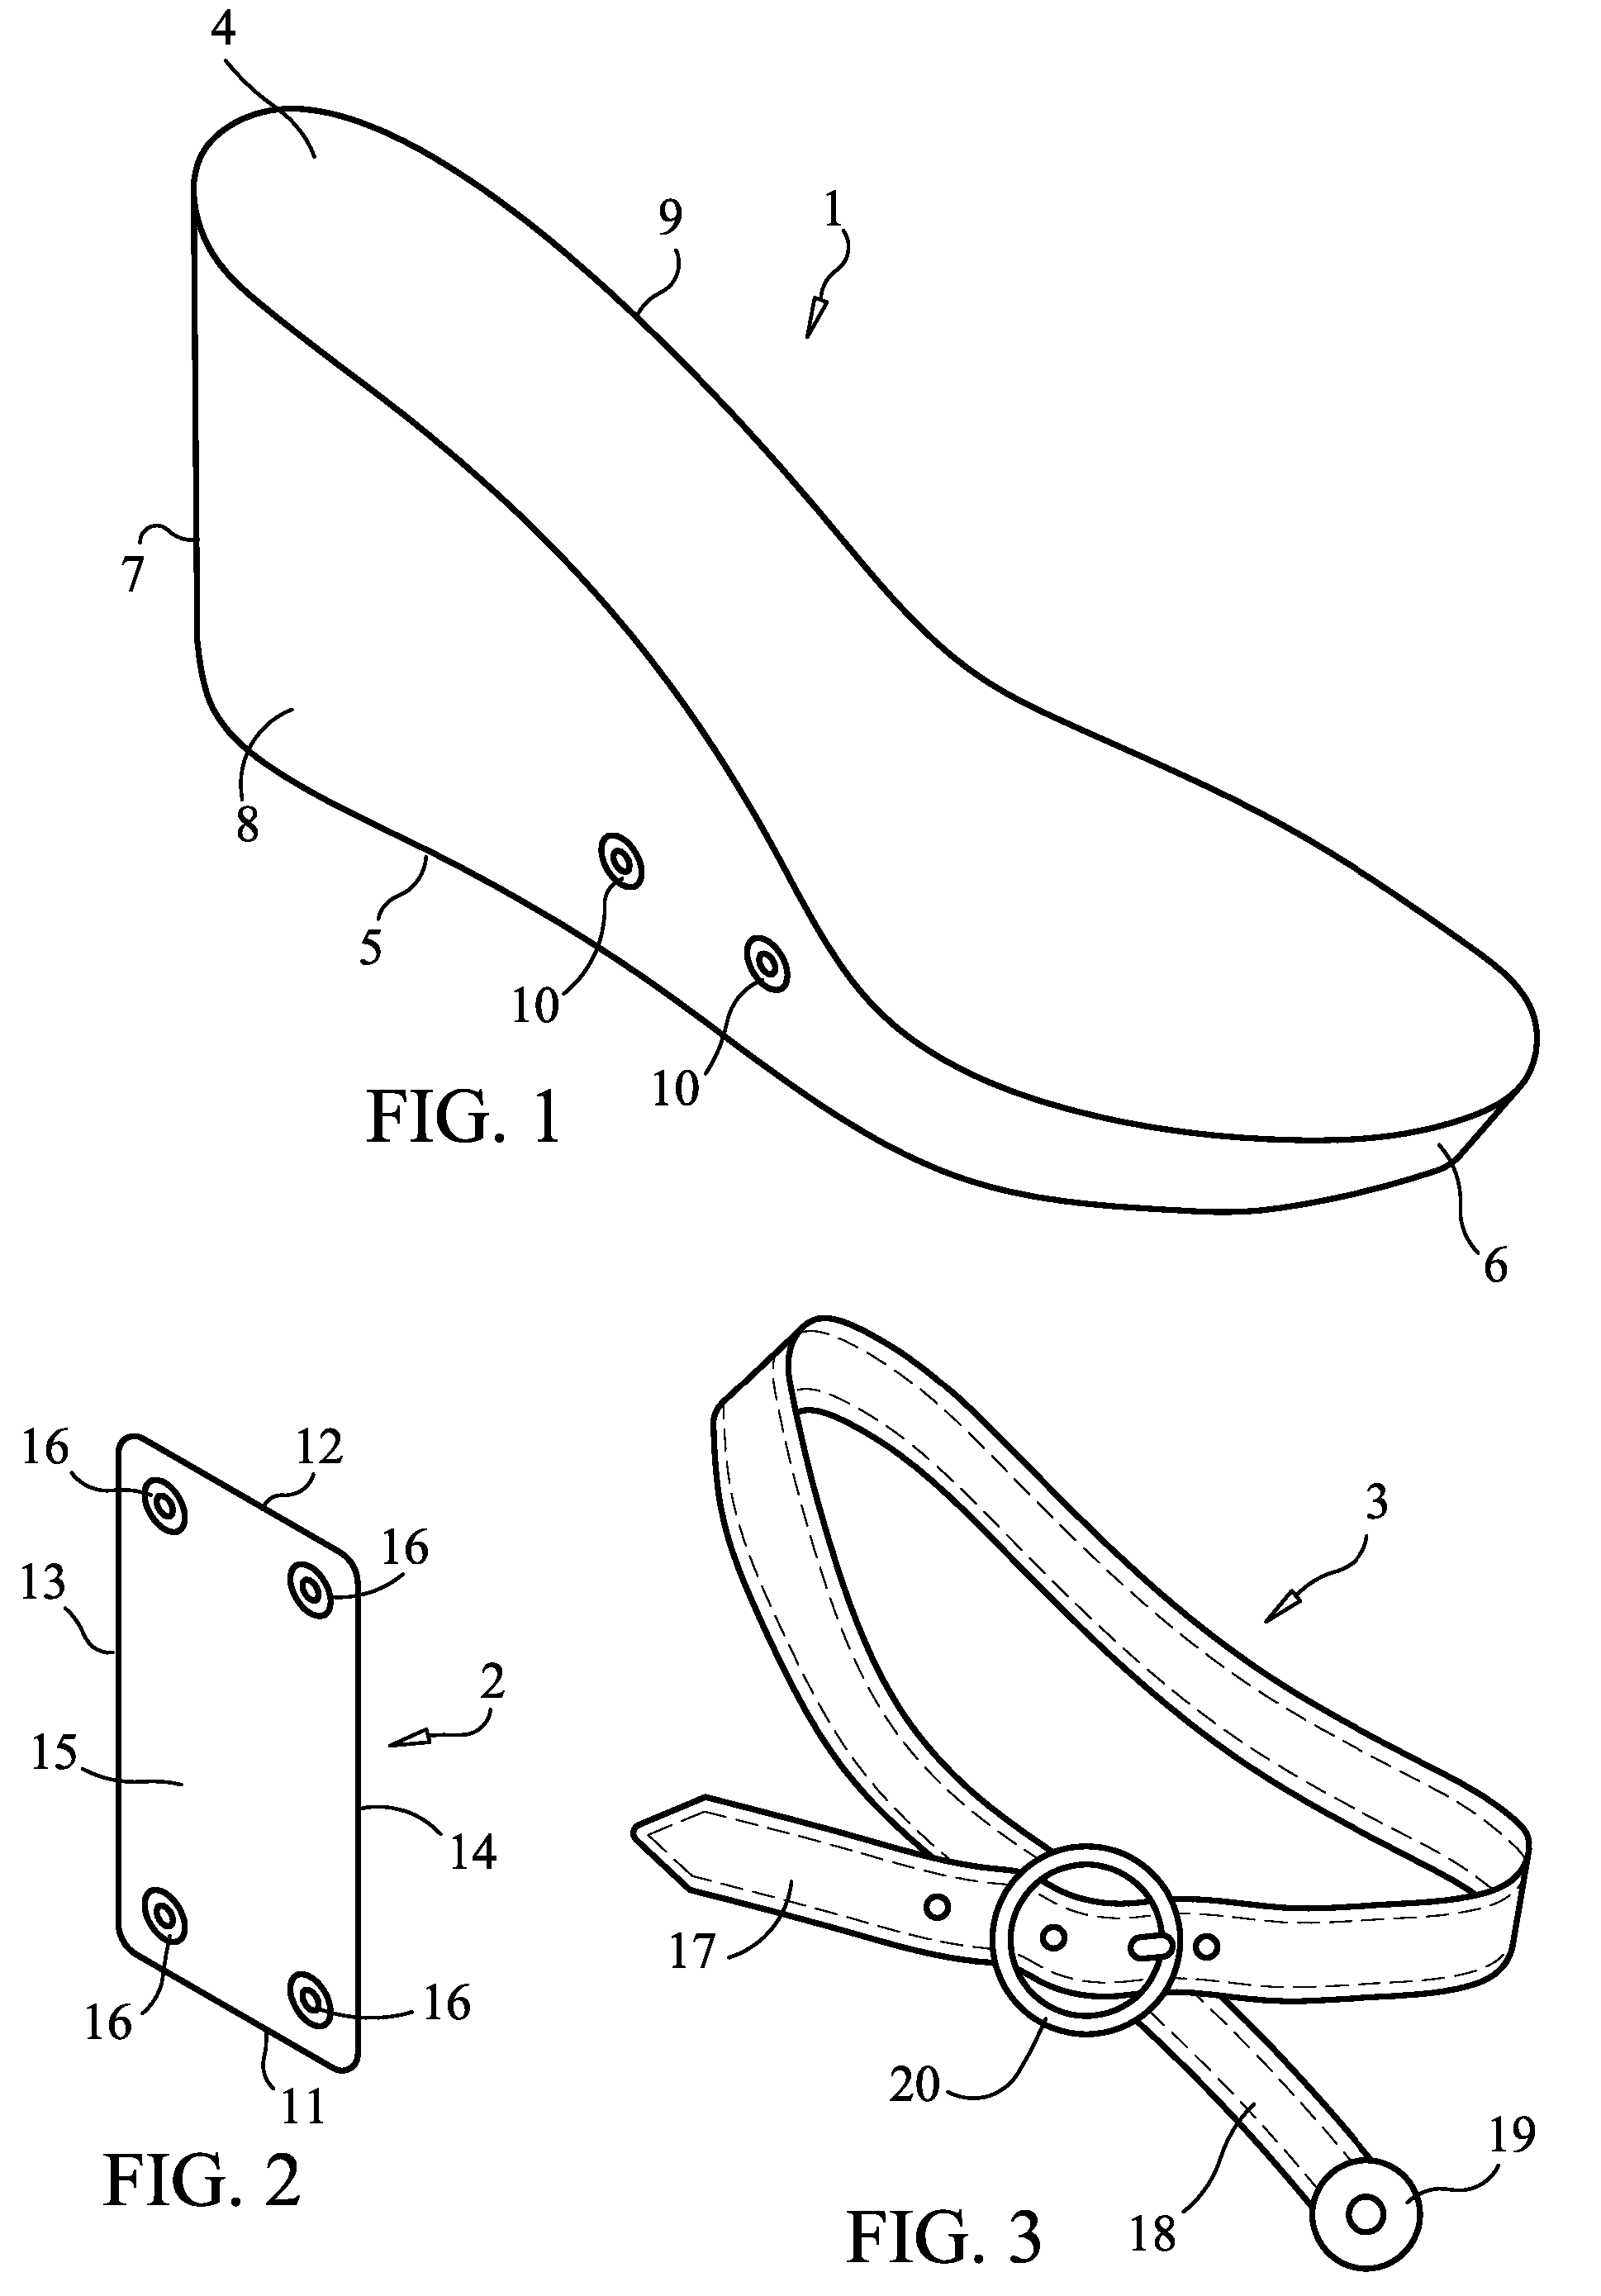 Interchangeable shoe-forming assembly